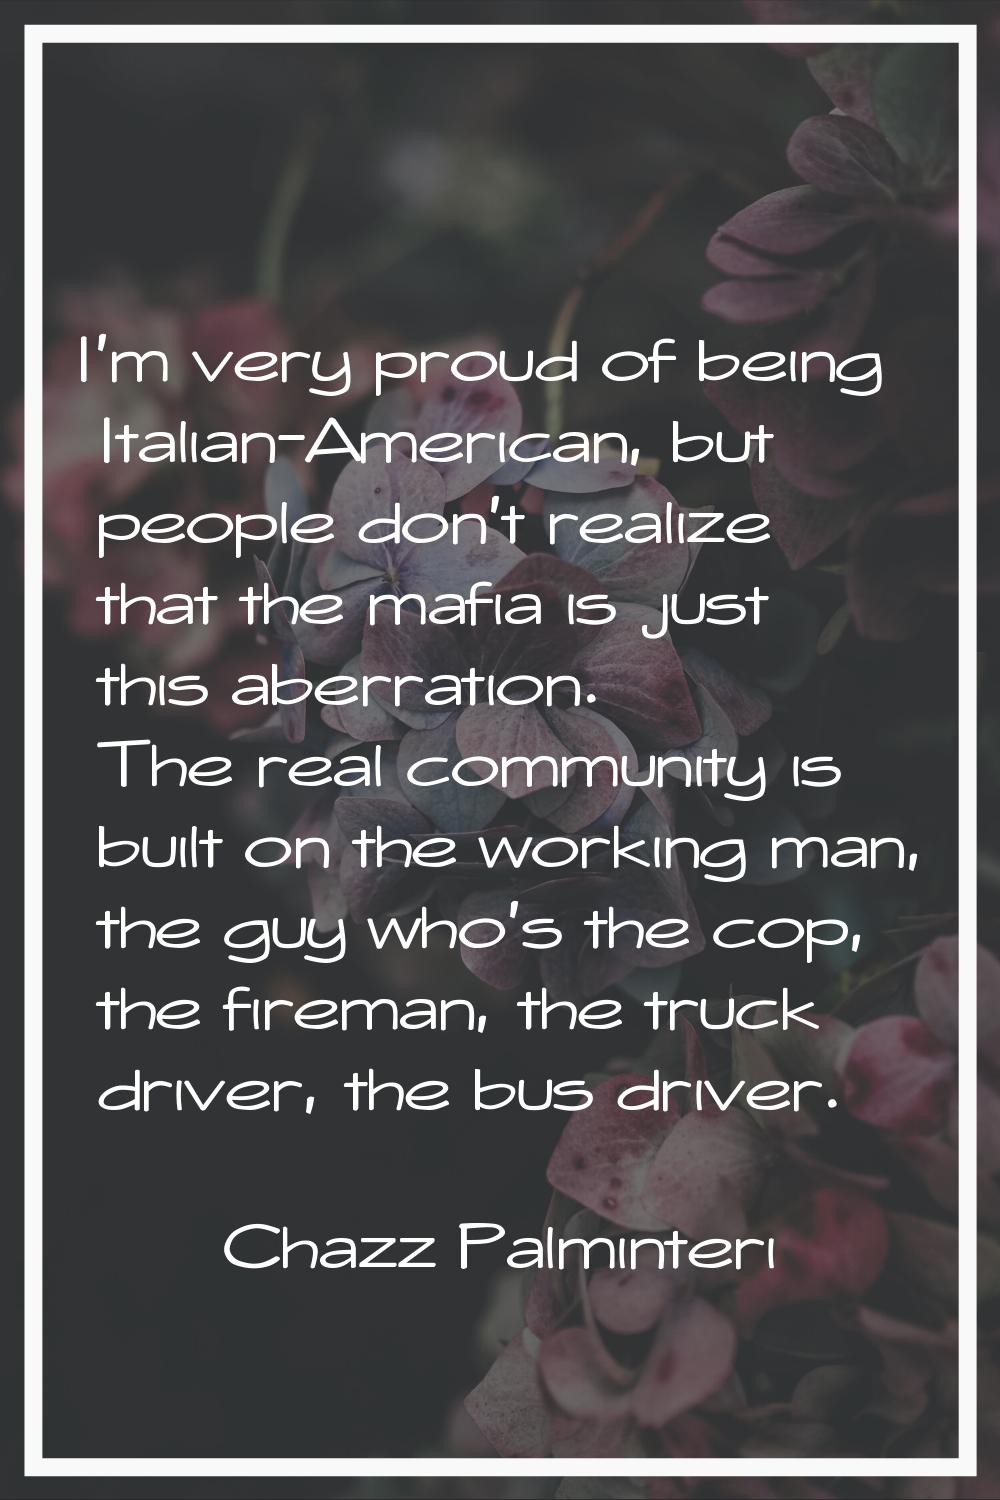 I'm very proud of being Italian-American, but people don't realize that the mafia is just this aber